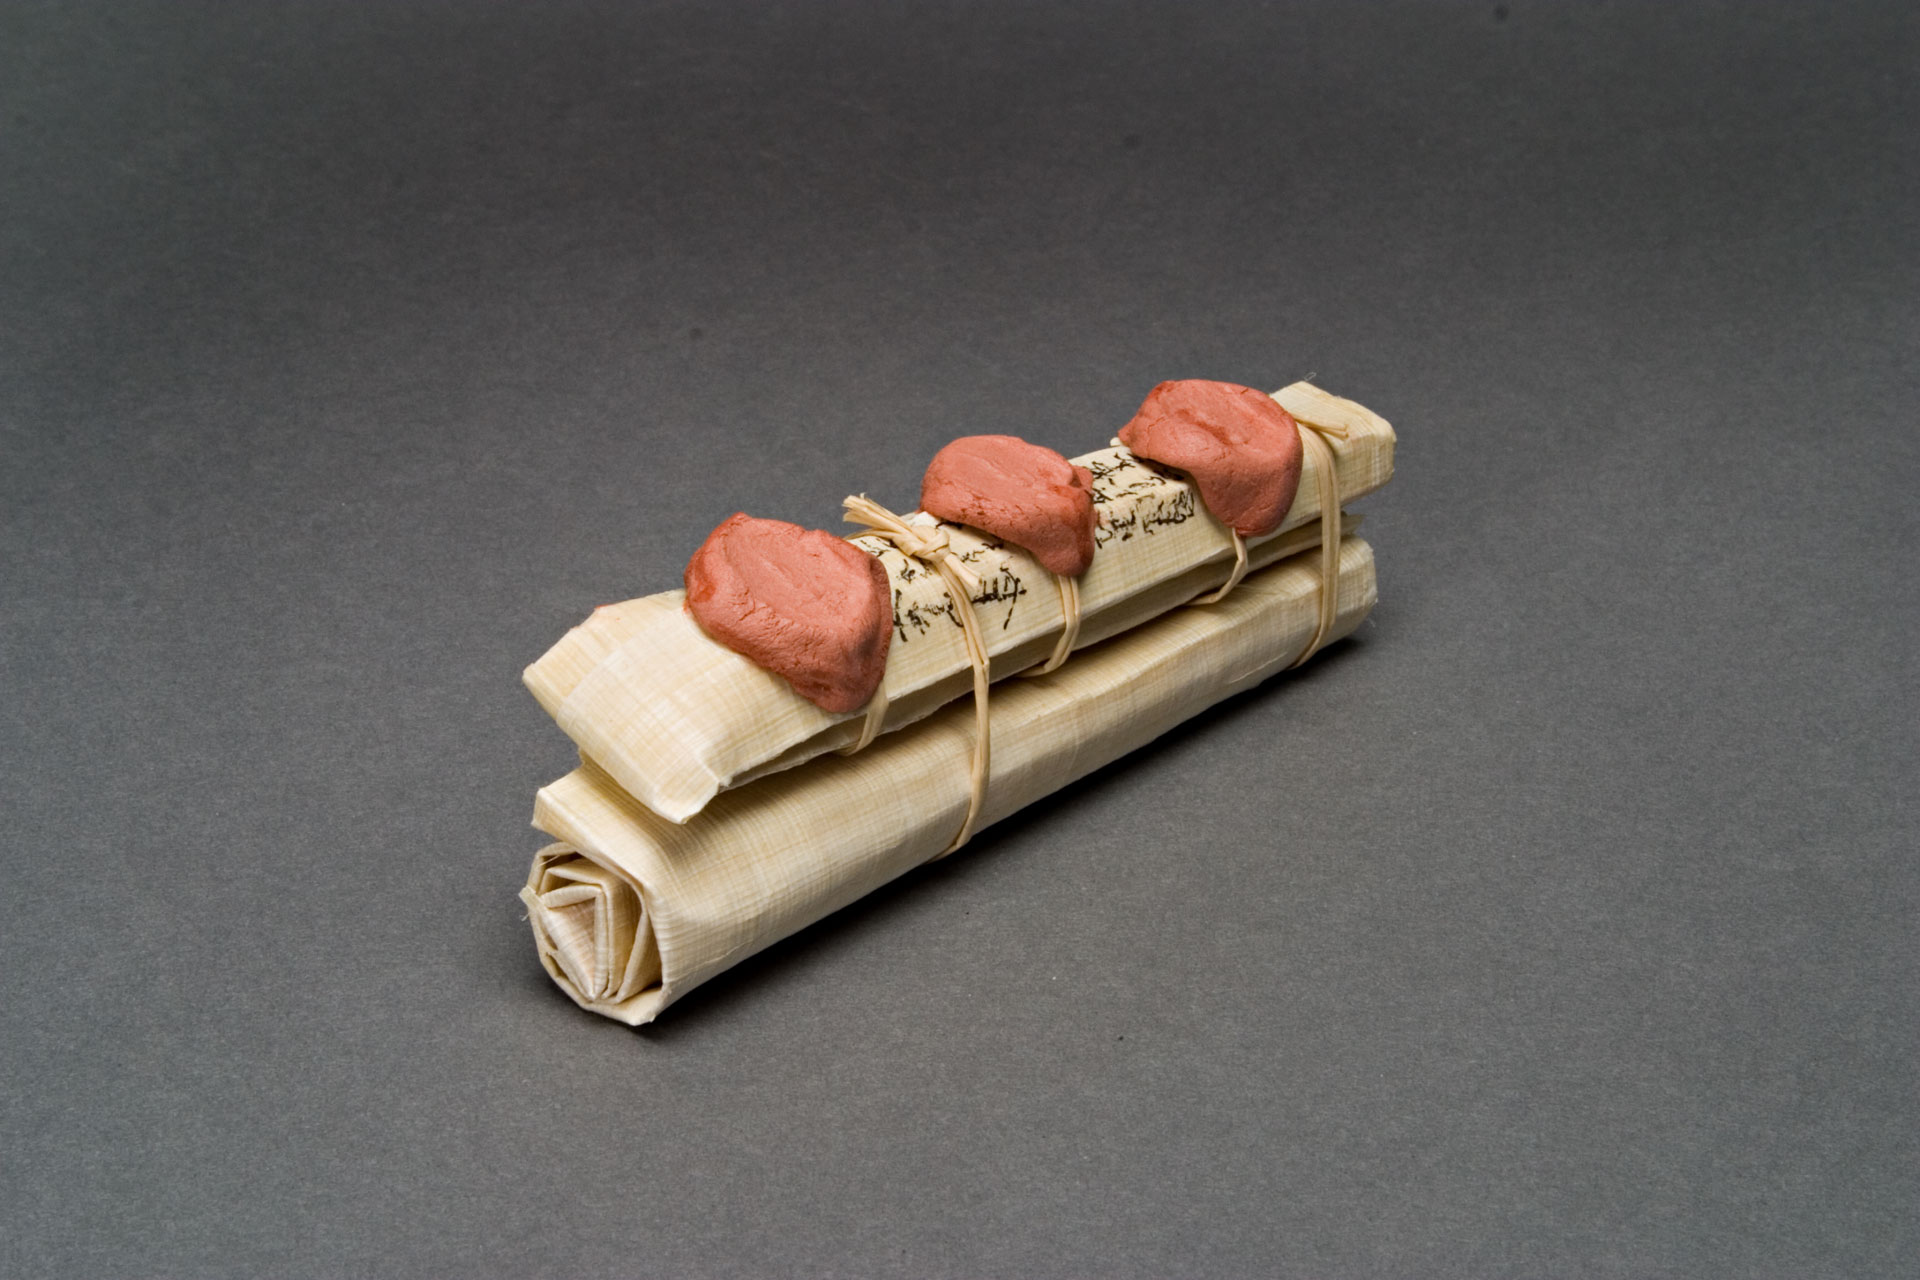 A scroll of papyrus is wound with twine, and three red-orange wax seals are on top of it.